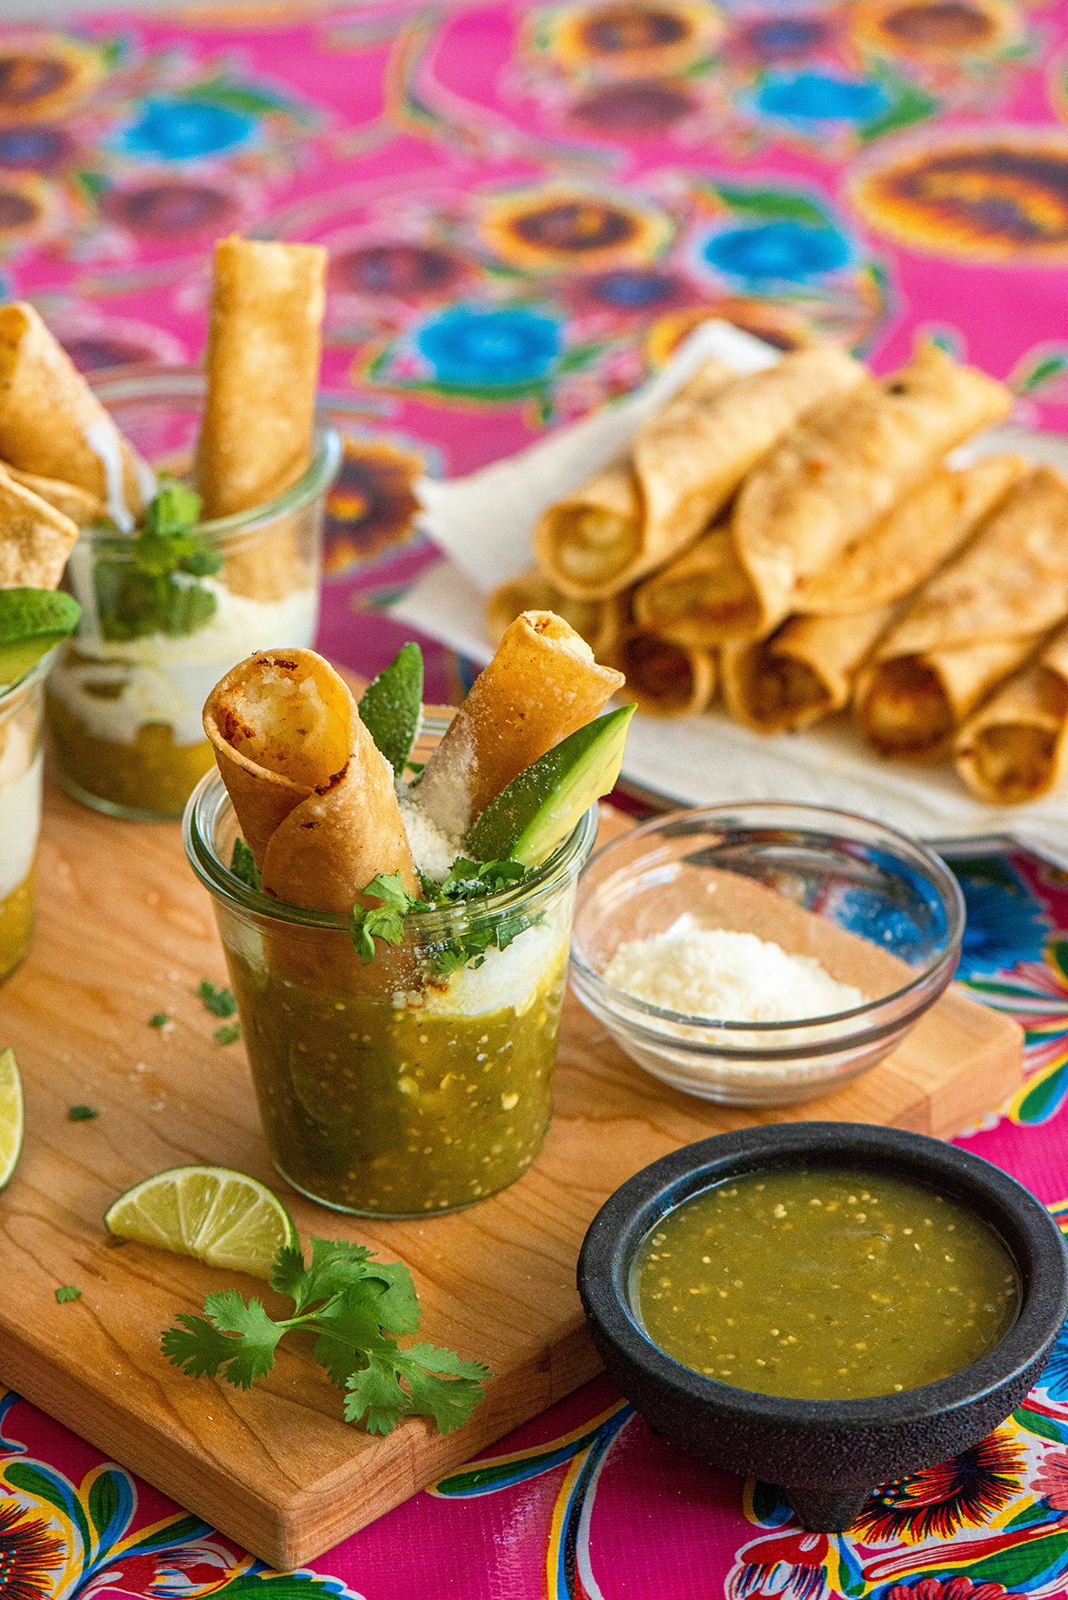 | - Taquitos and Taquitos Ahogados Drowned Feasts Nibbles